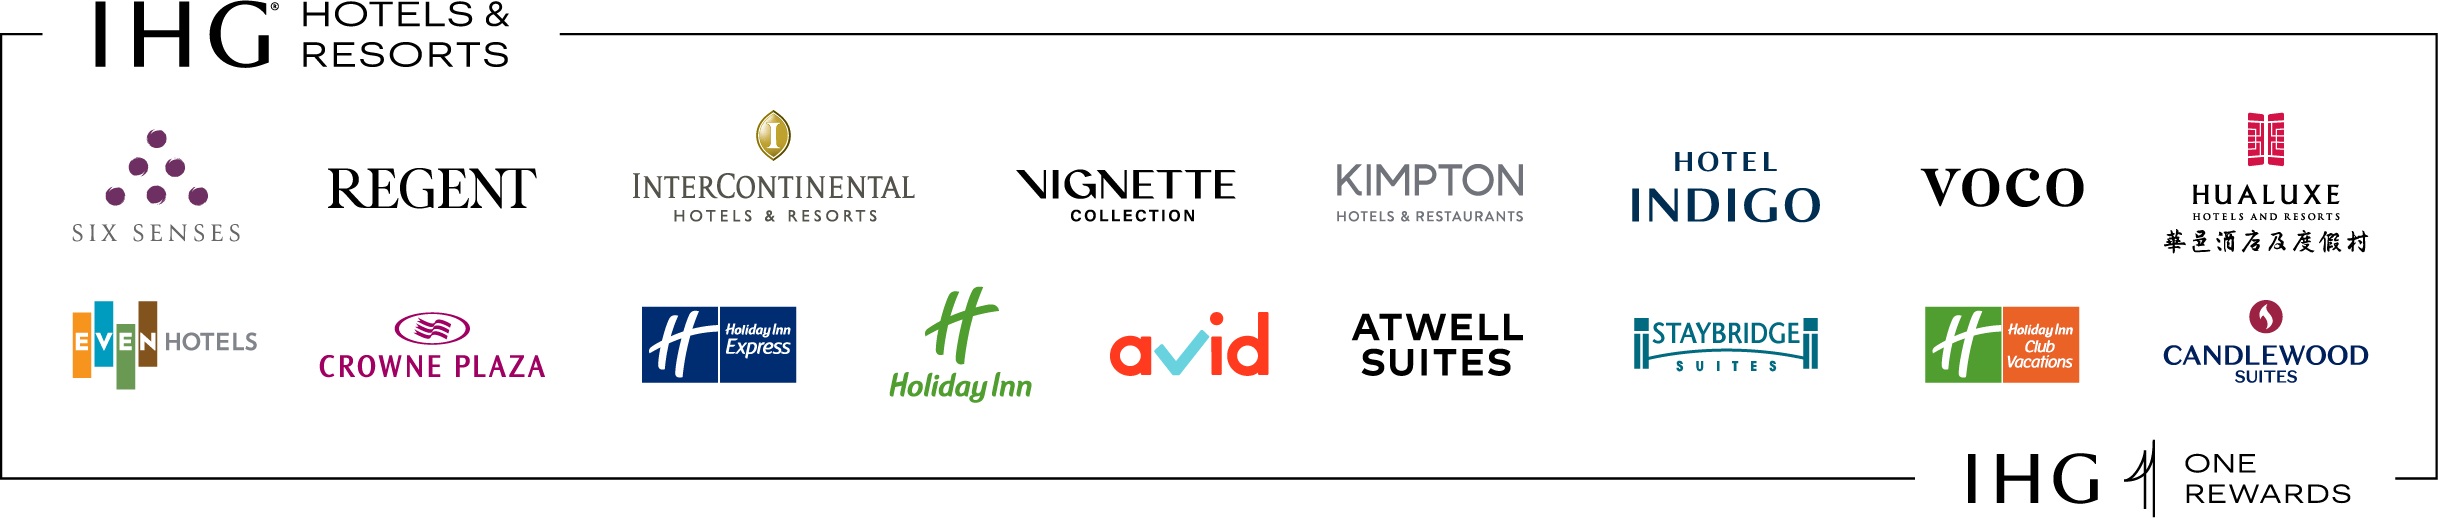 IHG logos and brands